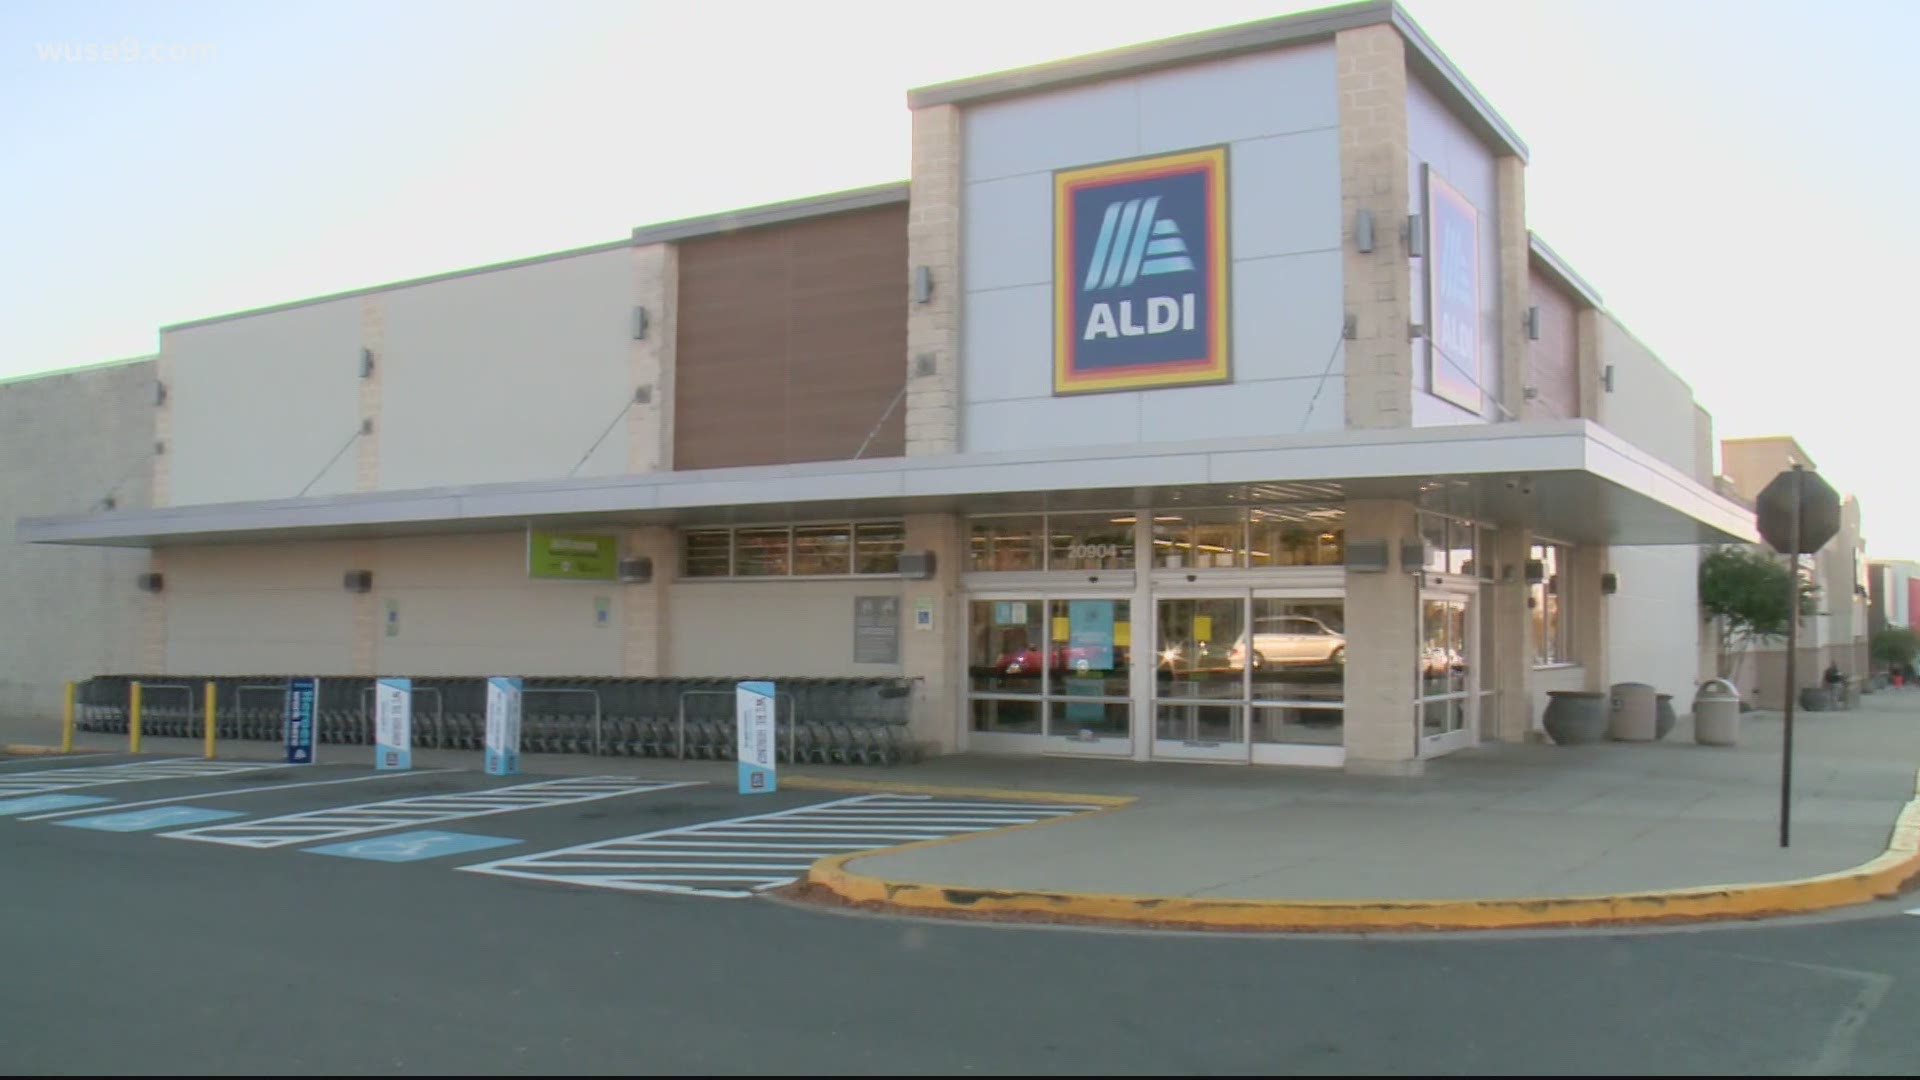 Three employees at an Aldi in Germantown, Maryland, contracted COVID-19 causing the store to shut down Tuesday.